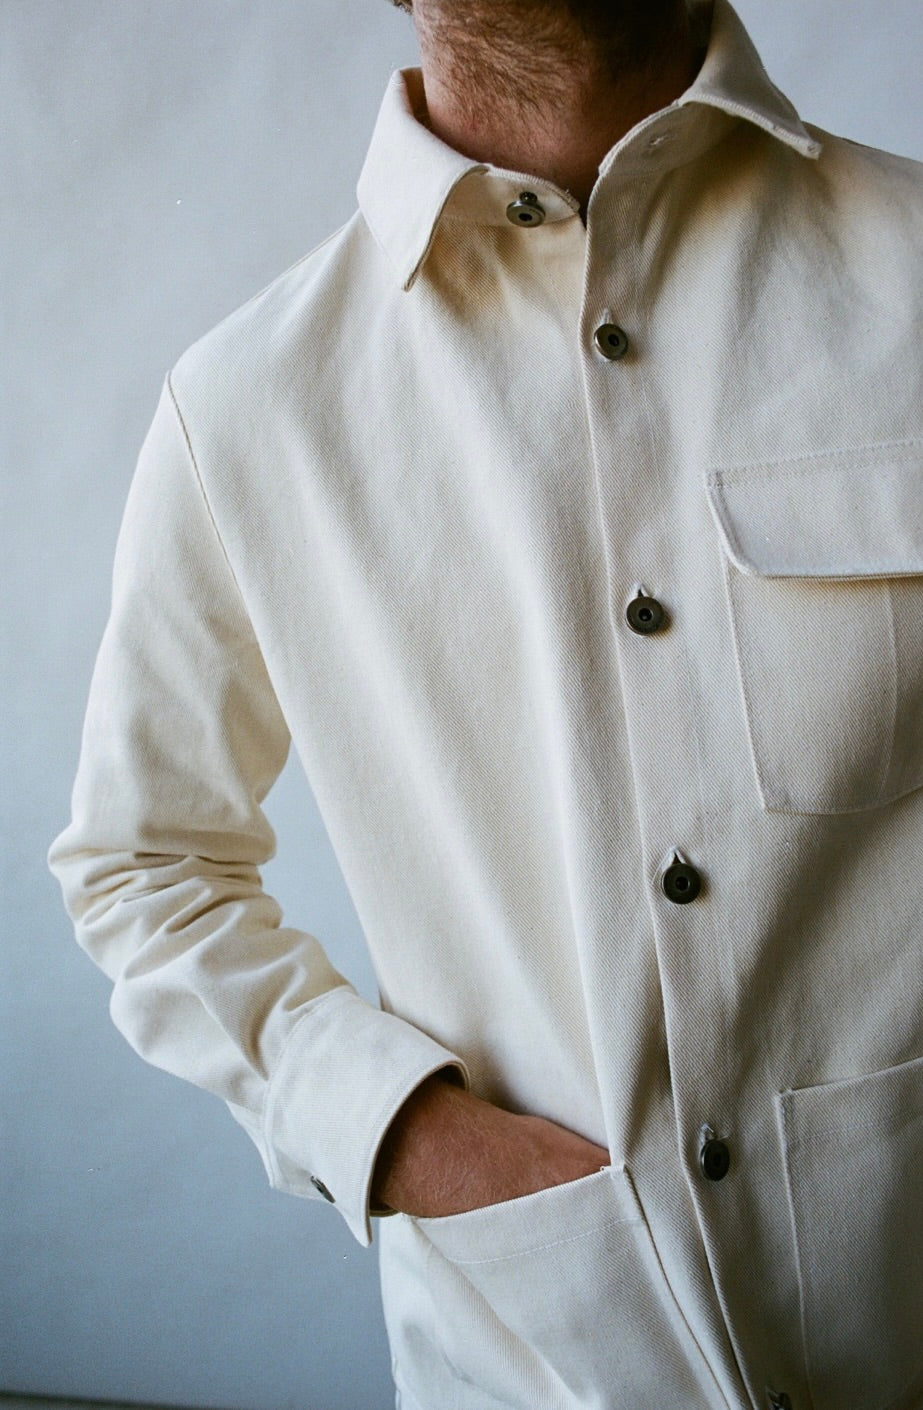 SS24 - Saturday Project - Unisex Jacket  No. 001 - The Chore Coat in Natural  - close-up front on man 3